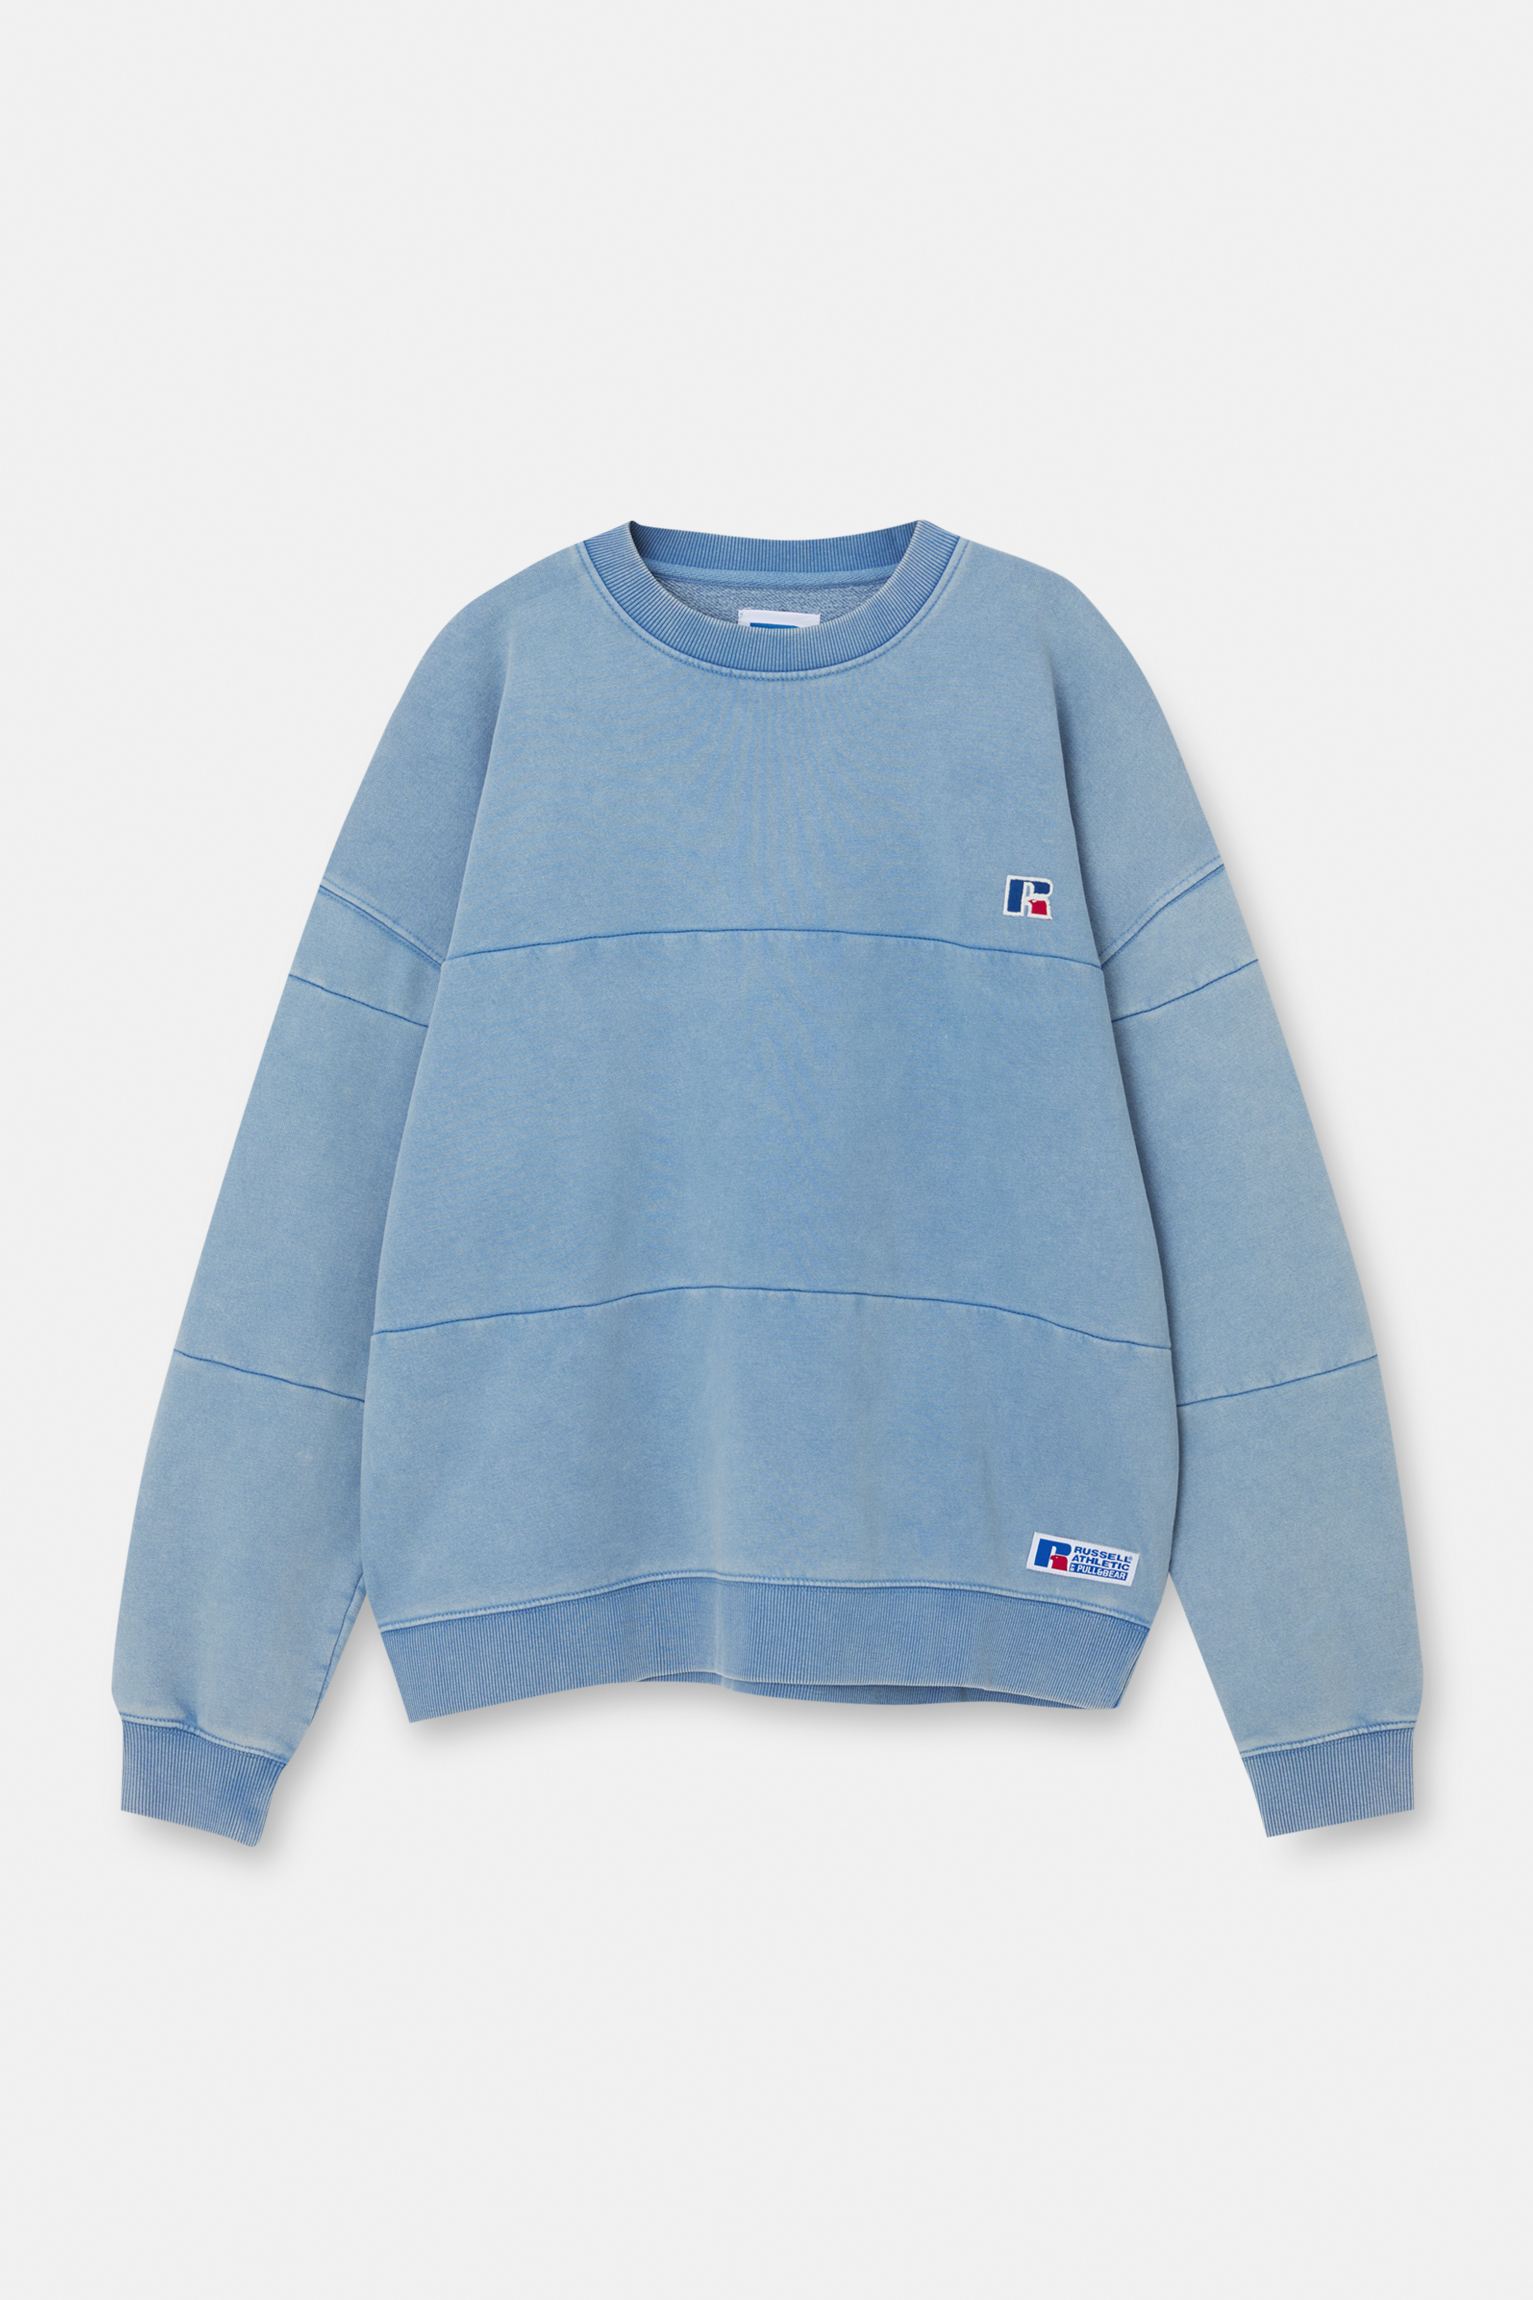 Russell Athletic by P&B faded sweatshirt